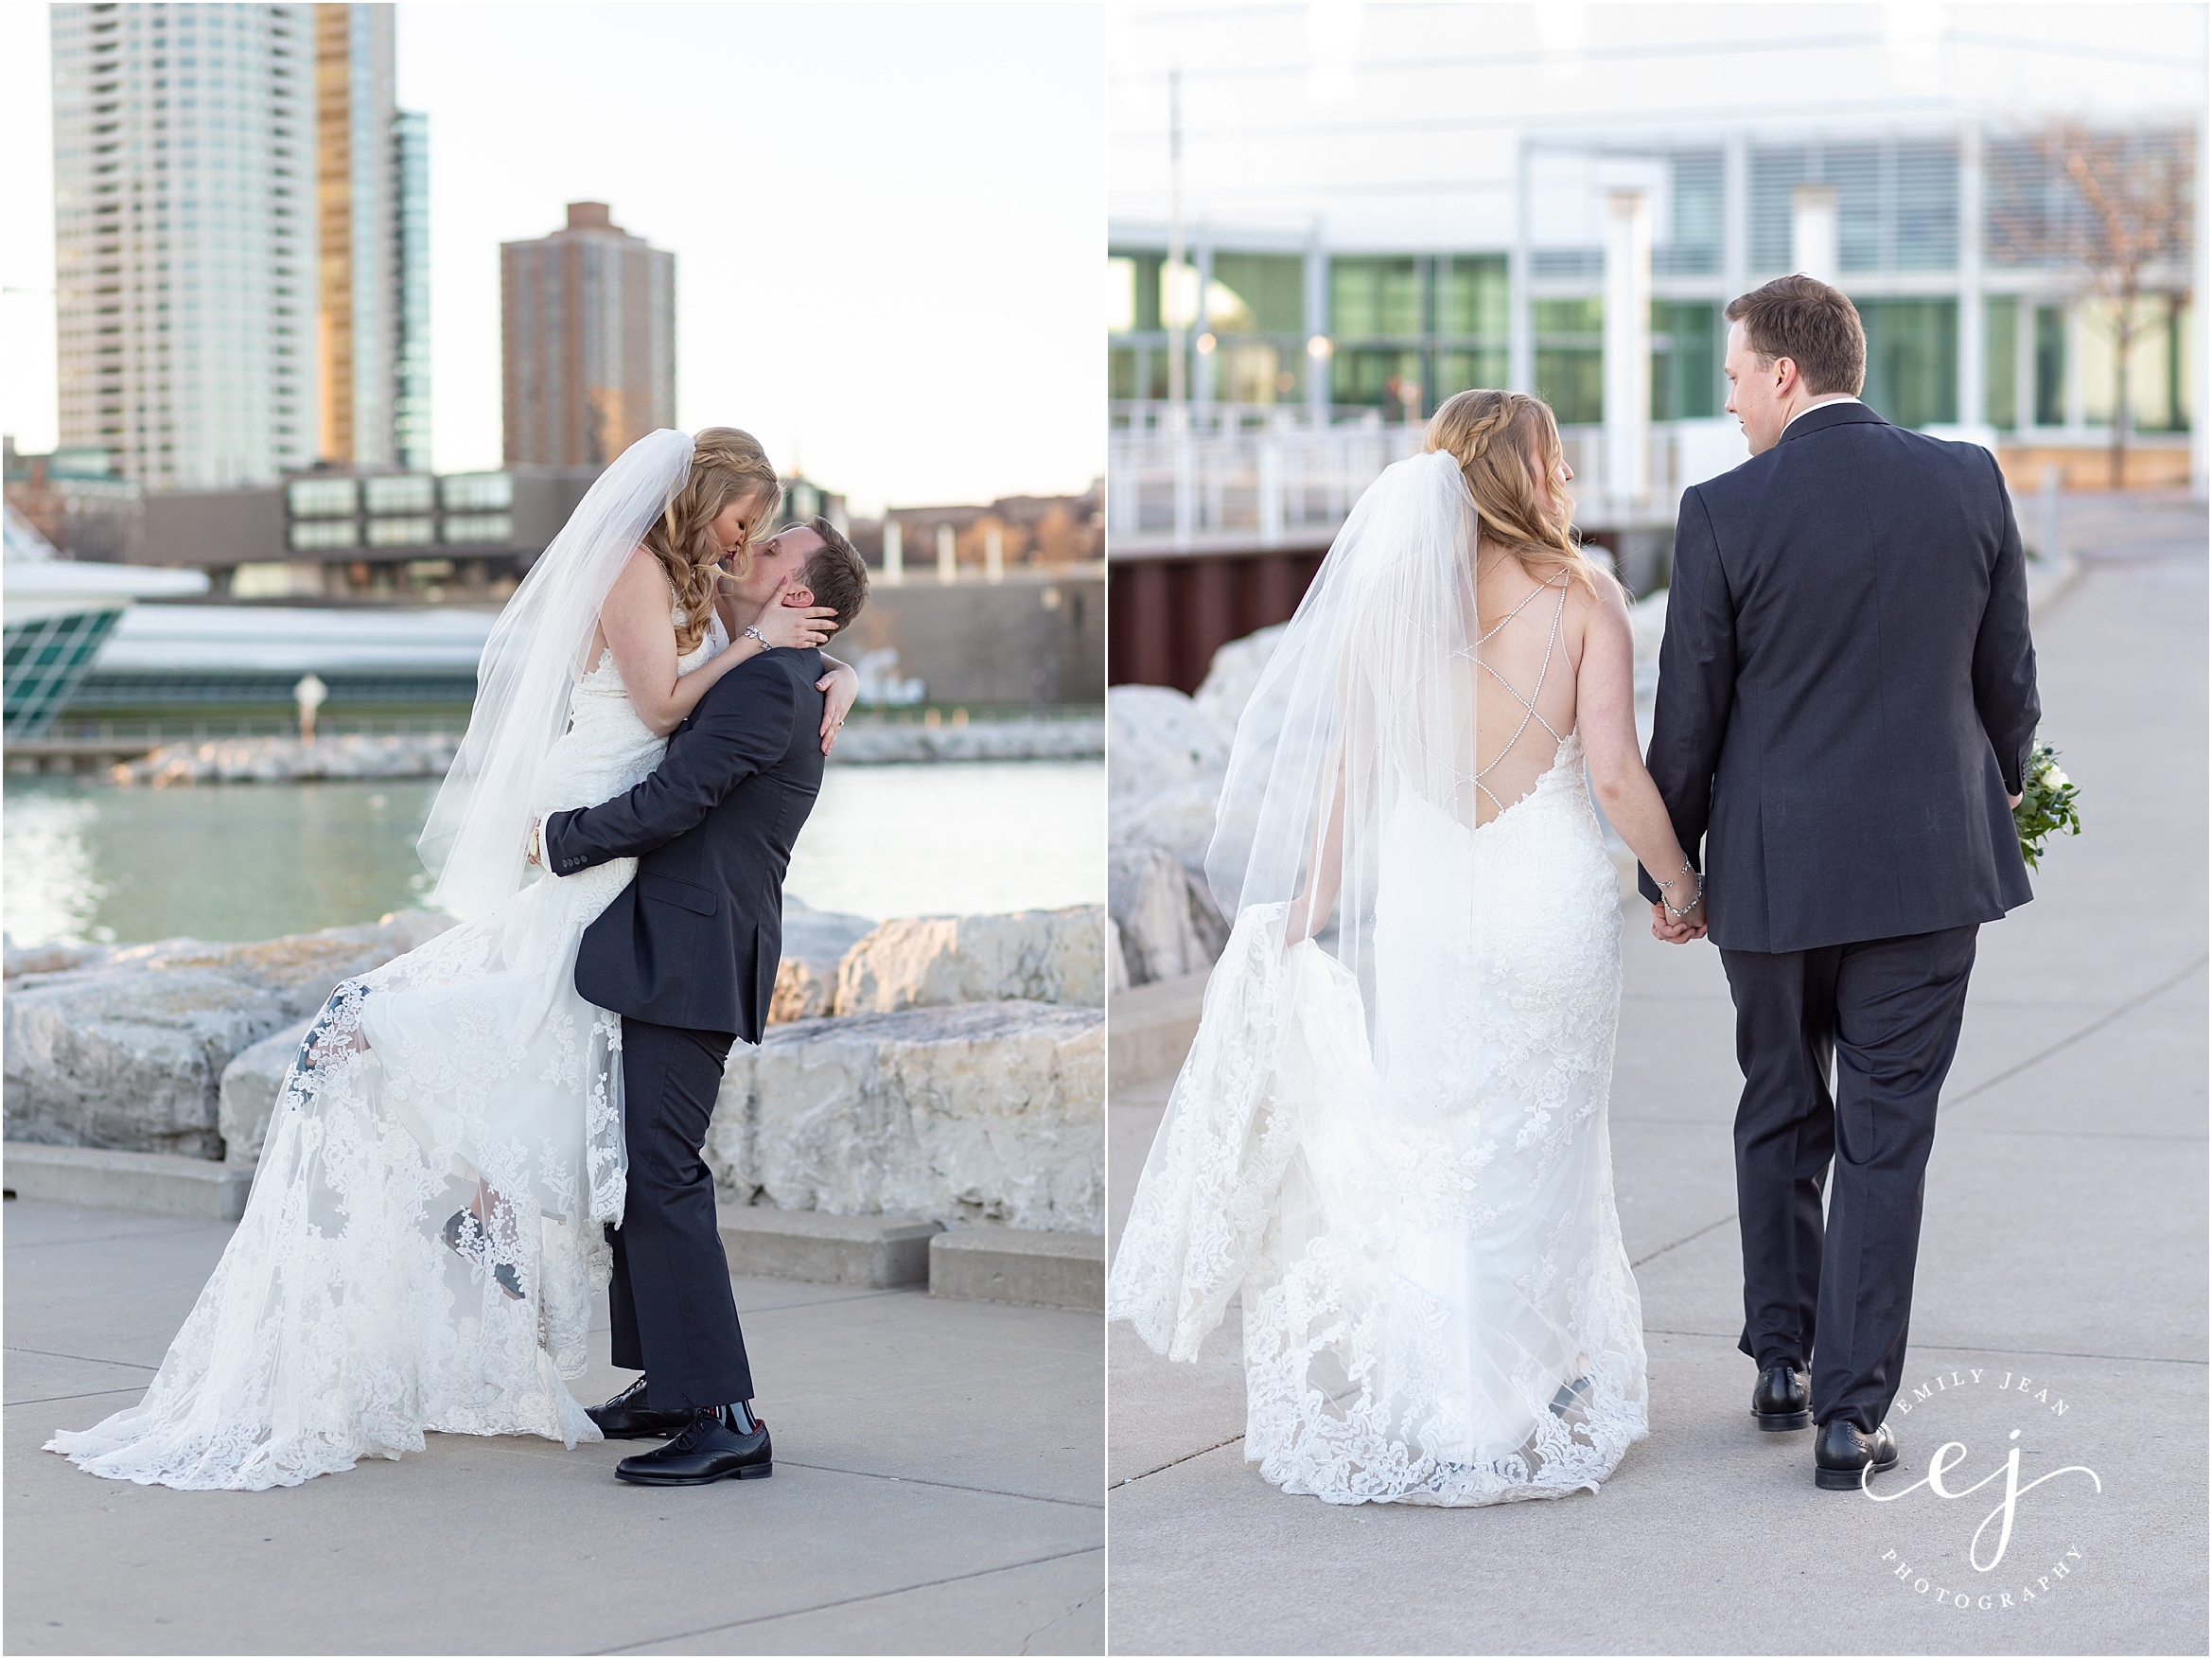 portrait of bride and groom milwaukee city scape